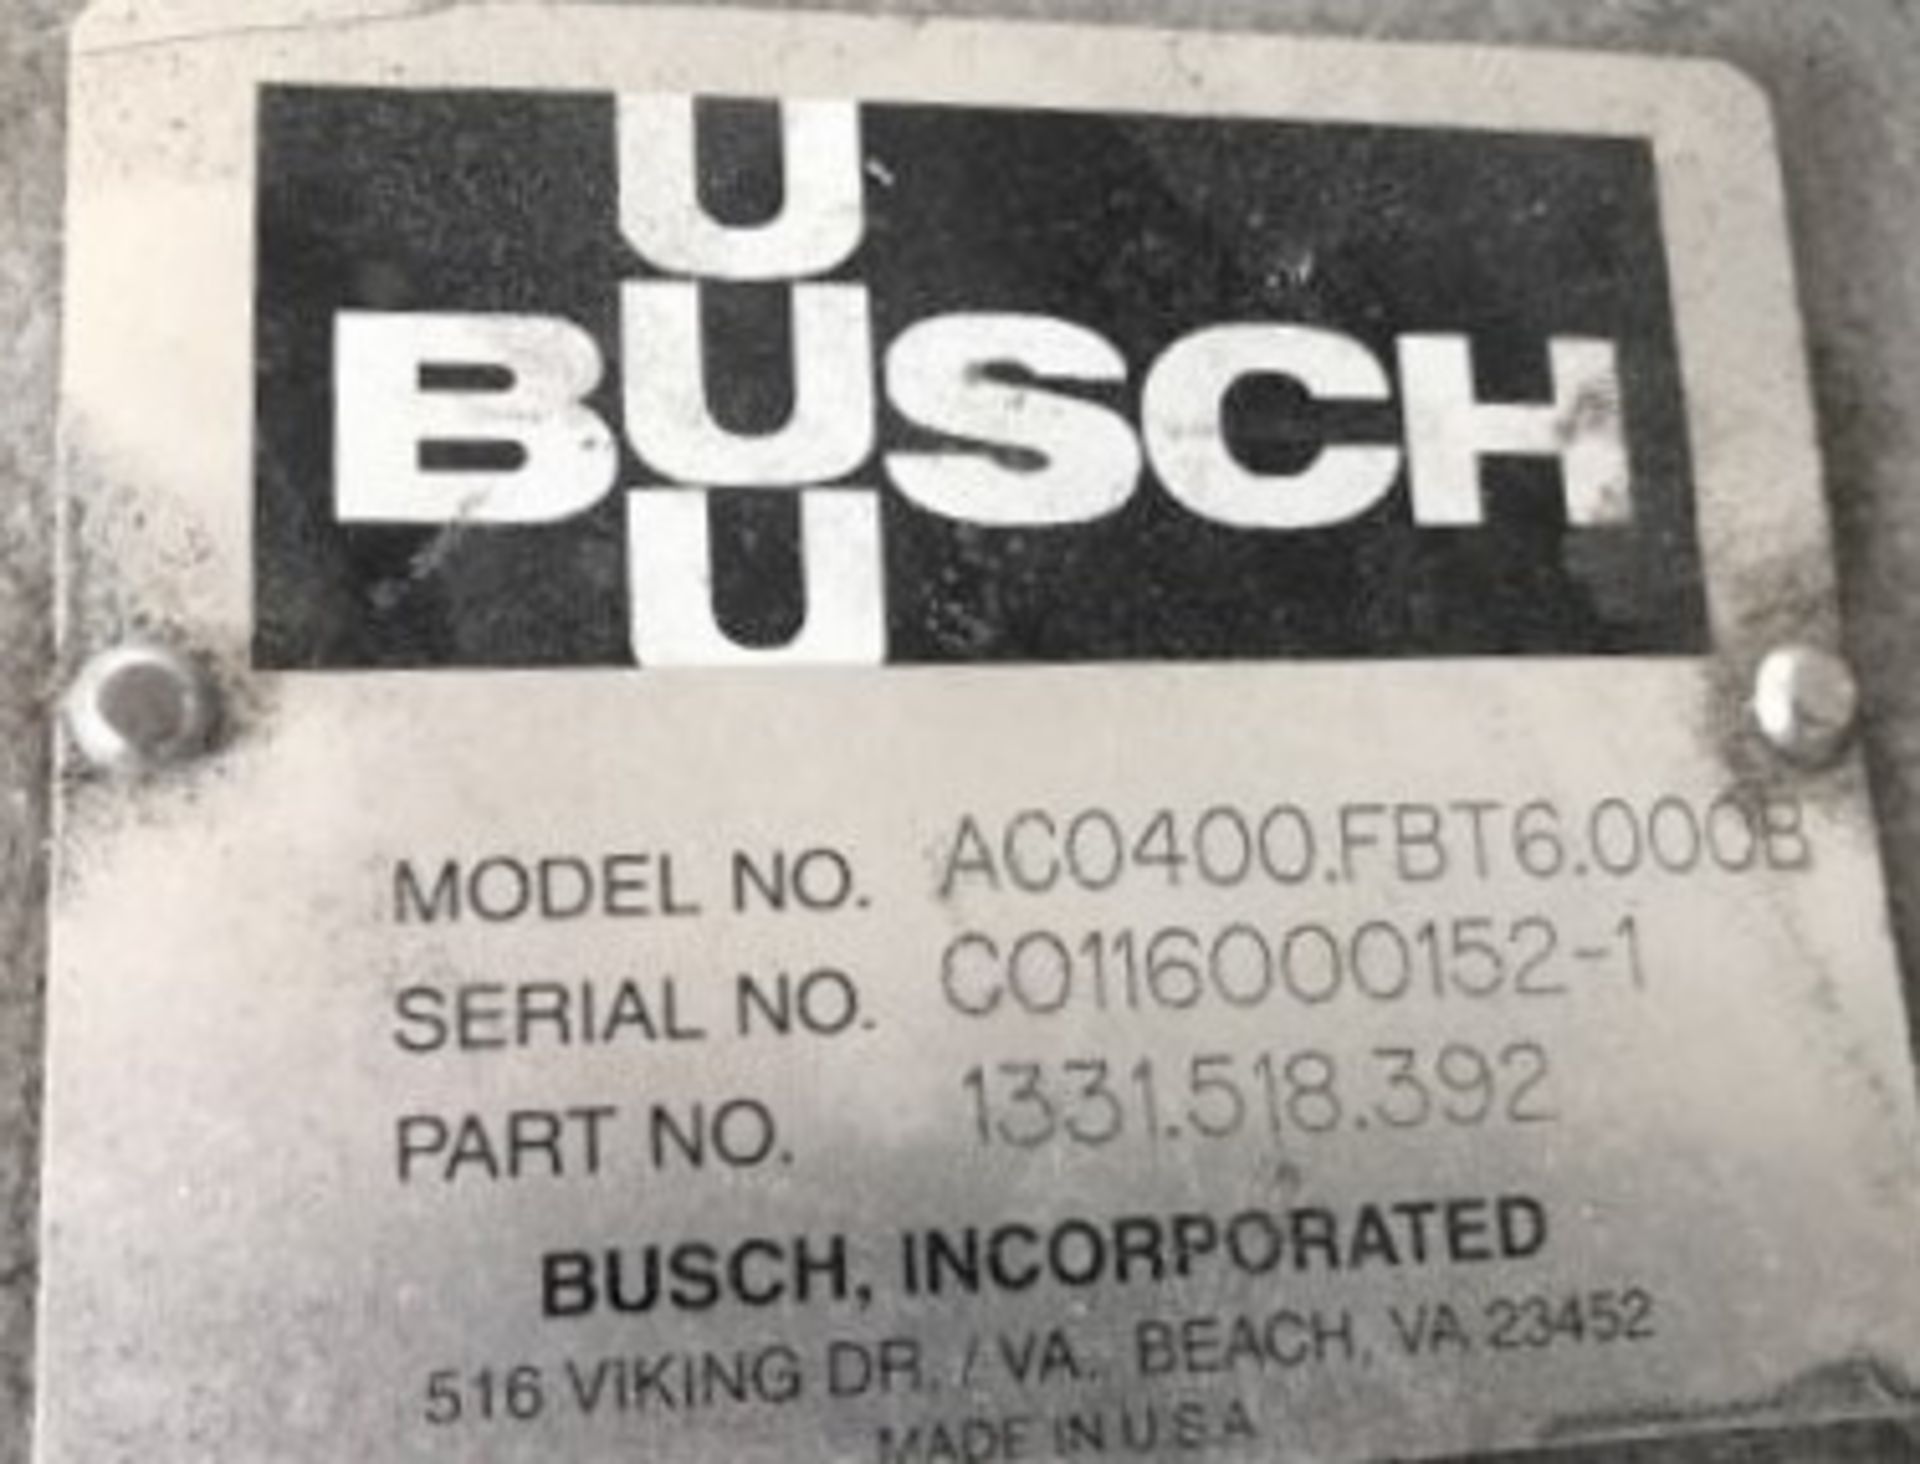 Busch 400 Vacuum pump. Busch skid mounted size 400 vacuum pump from pharmaceutical industry. With - Image 4 of 4